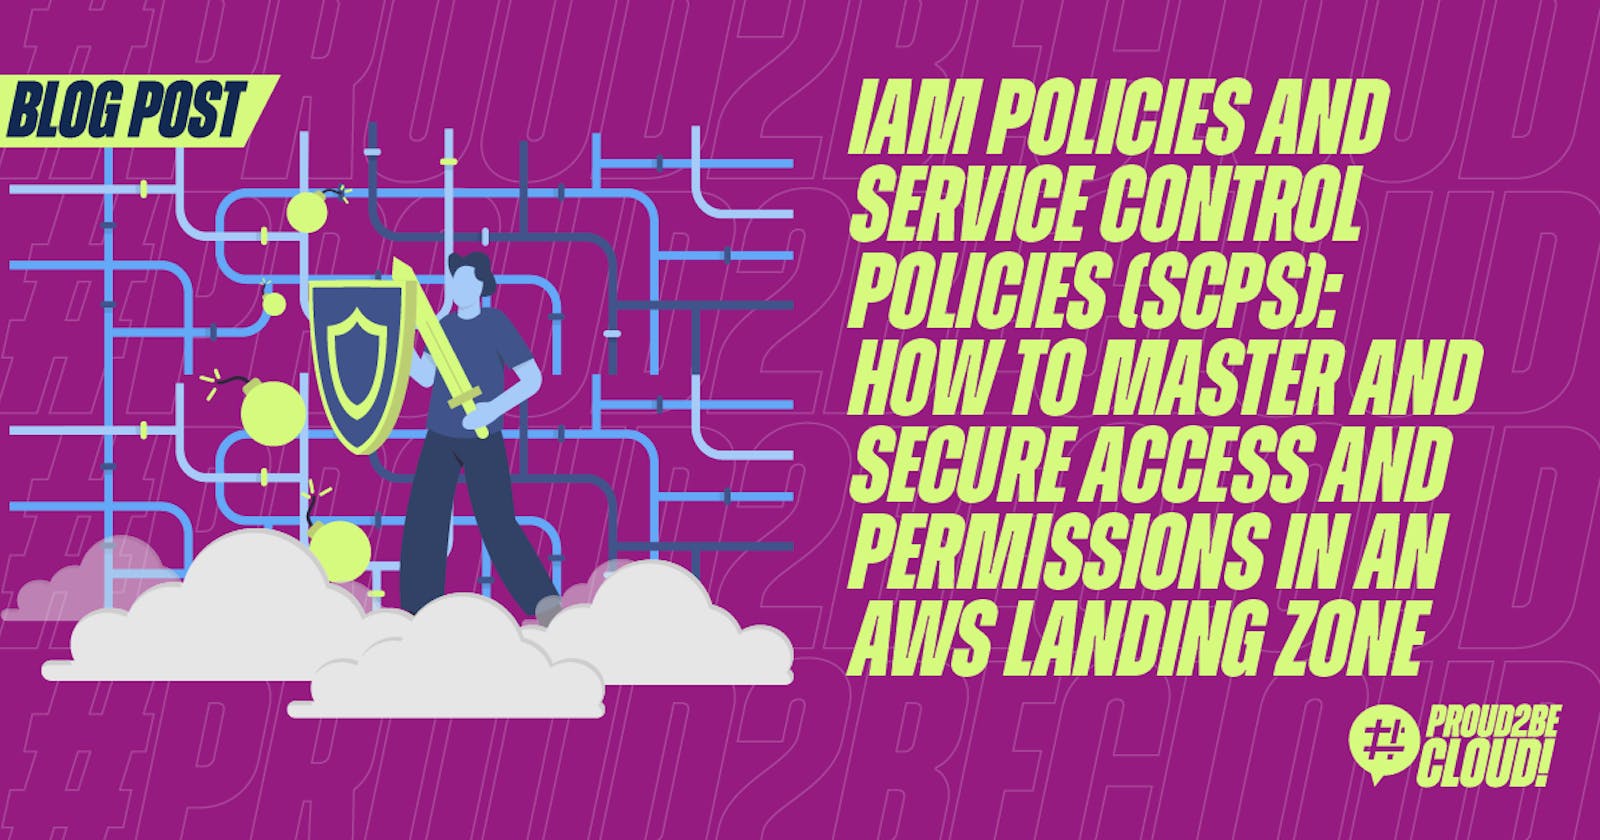 How to master and secure access and permissions in an AWS Landing Zone